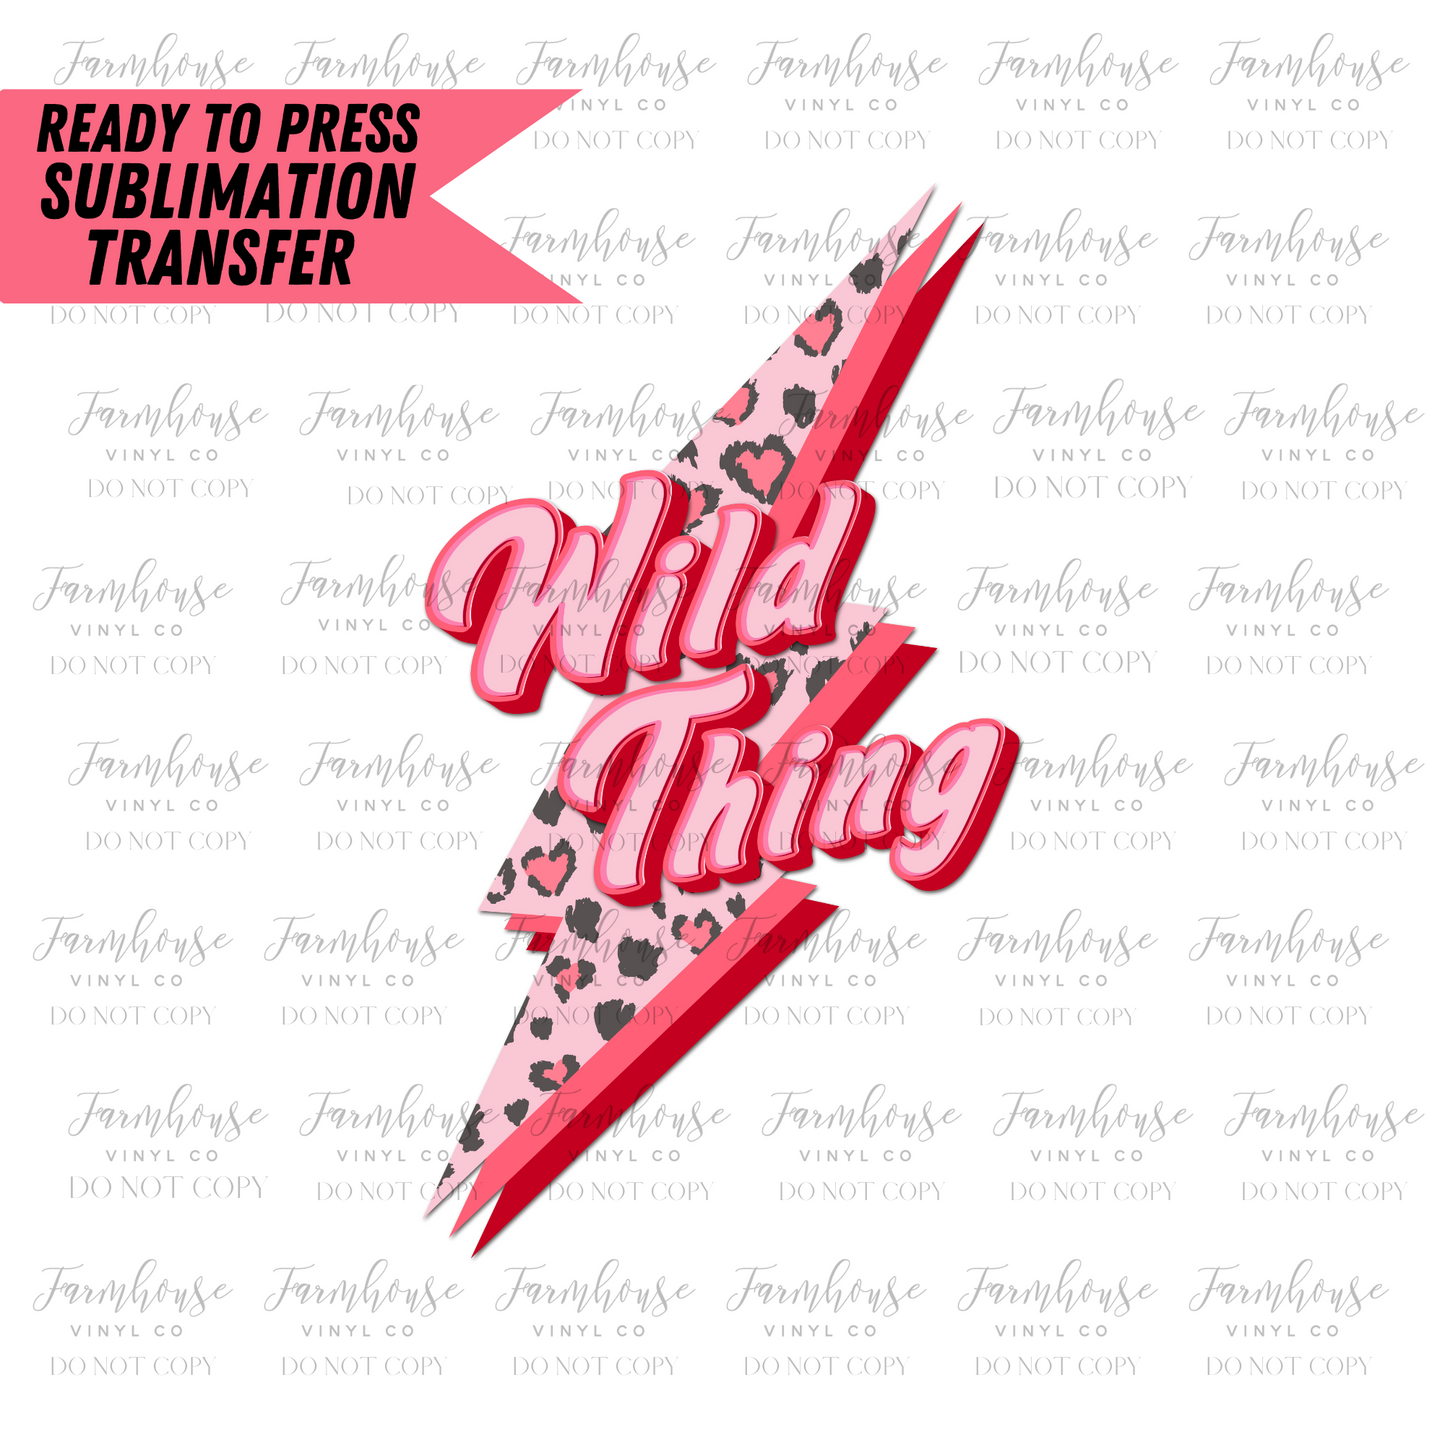 Wild Thing & You Make My Heart Sing Ready To Press Sublimation Transfer